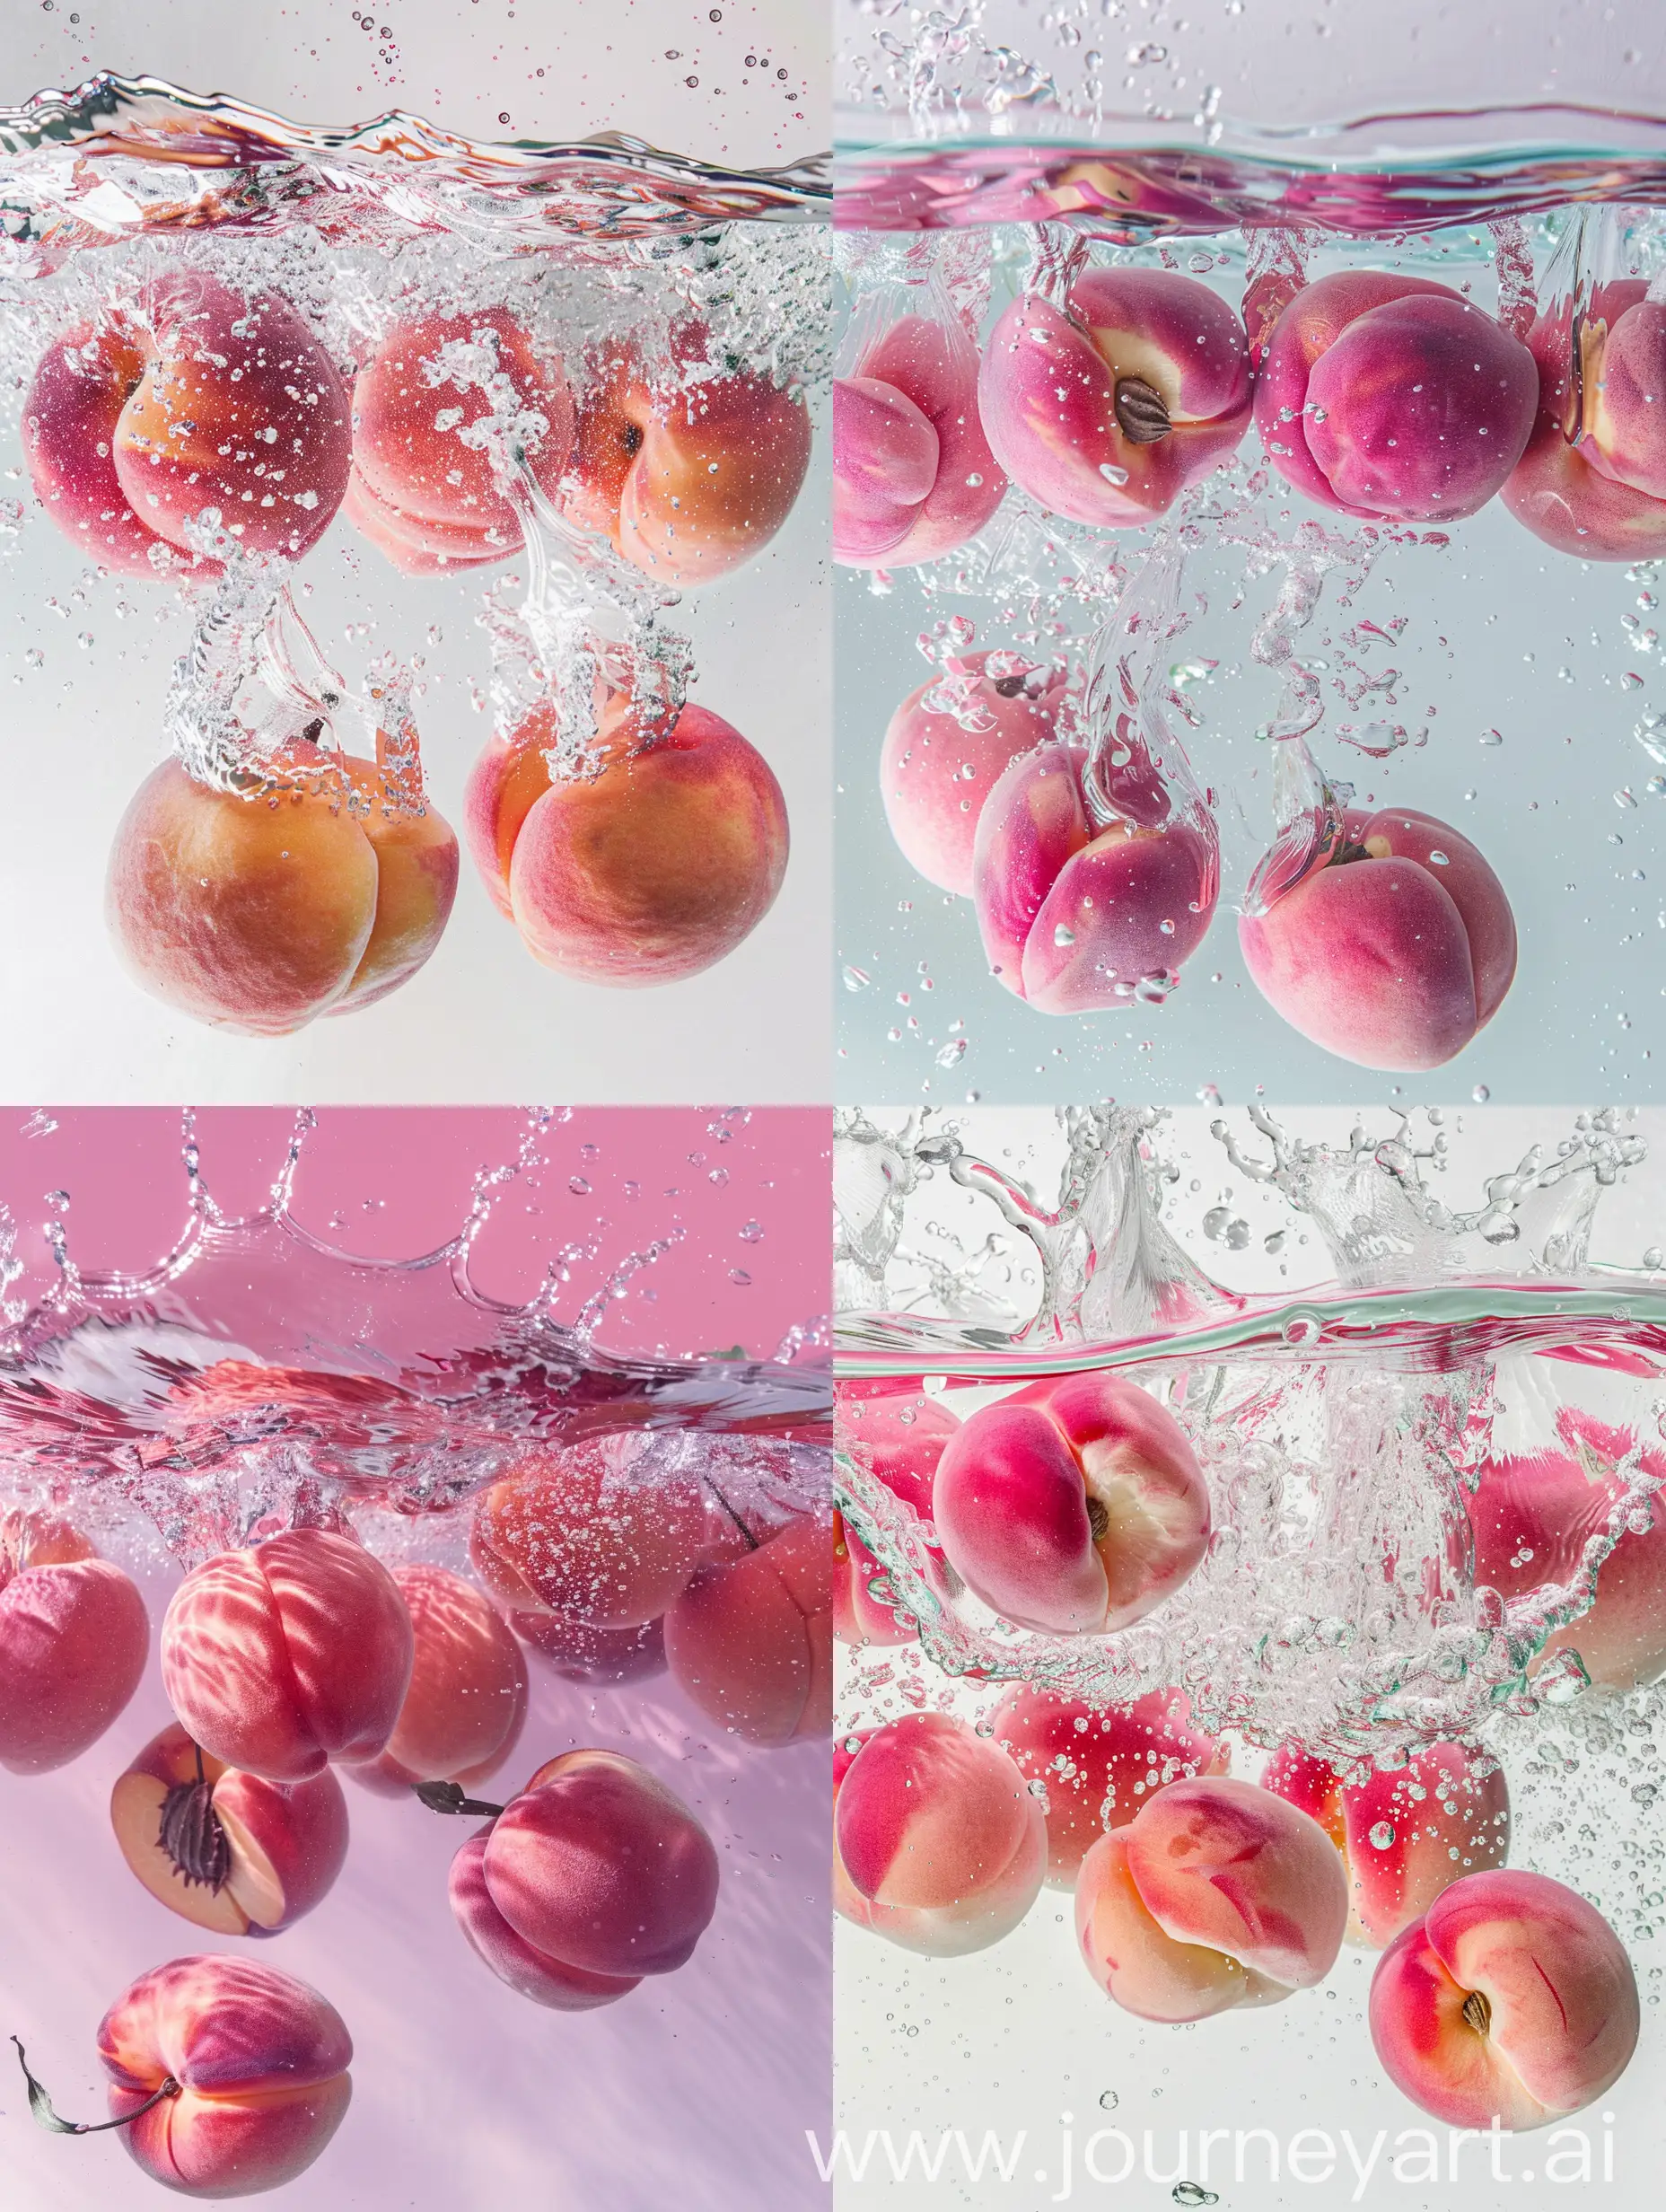 Pink-Peaches-Falling-into-Clear-Water-with-Splashes